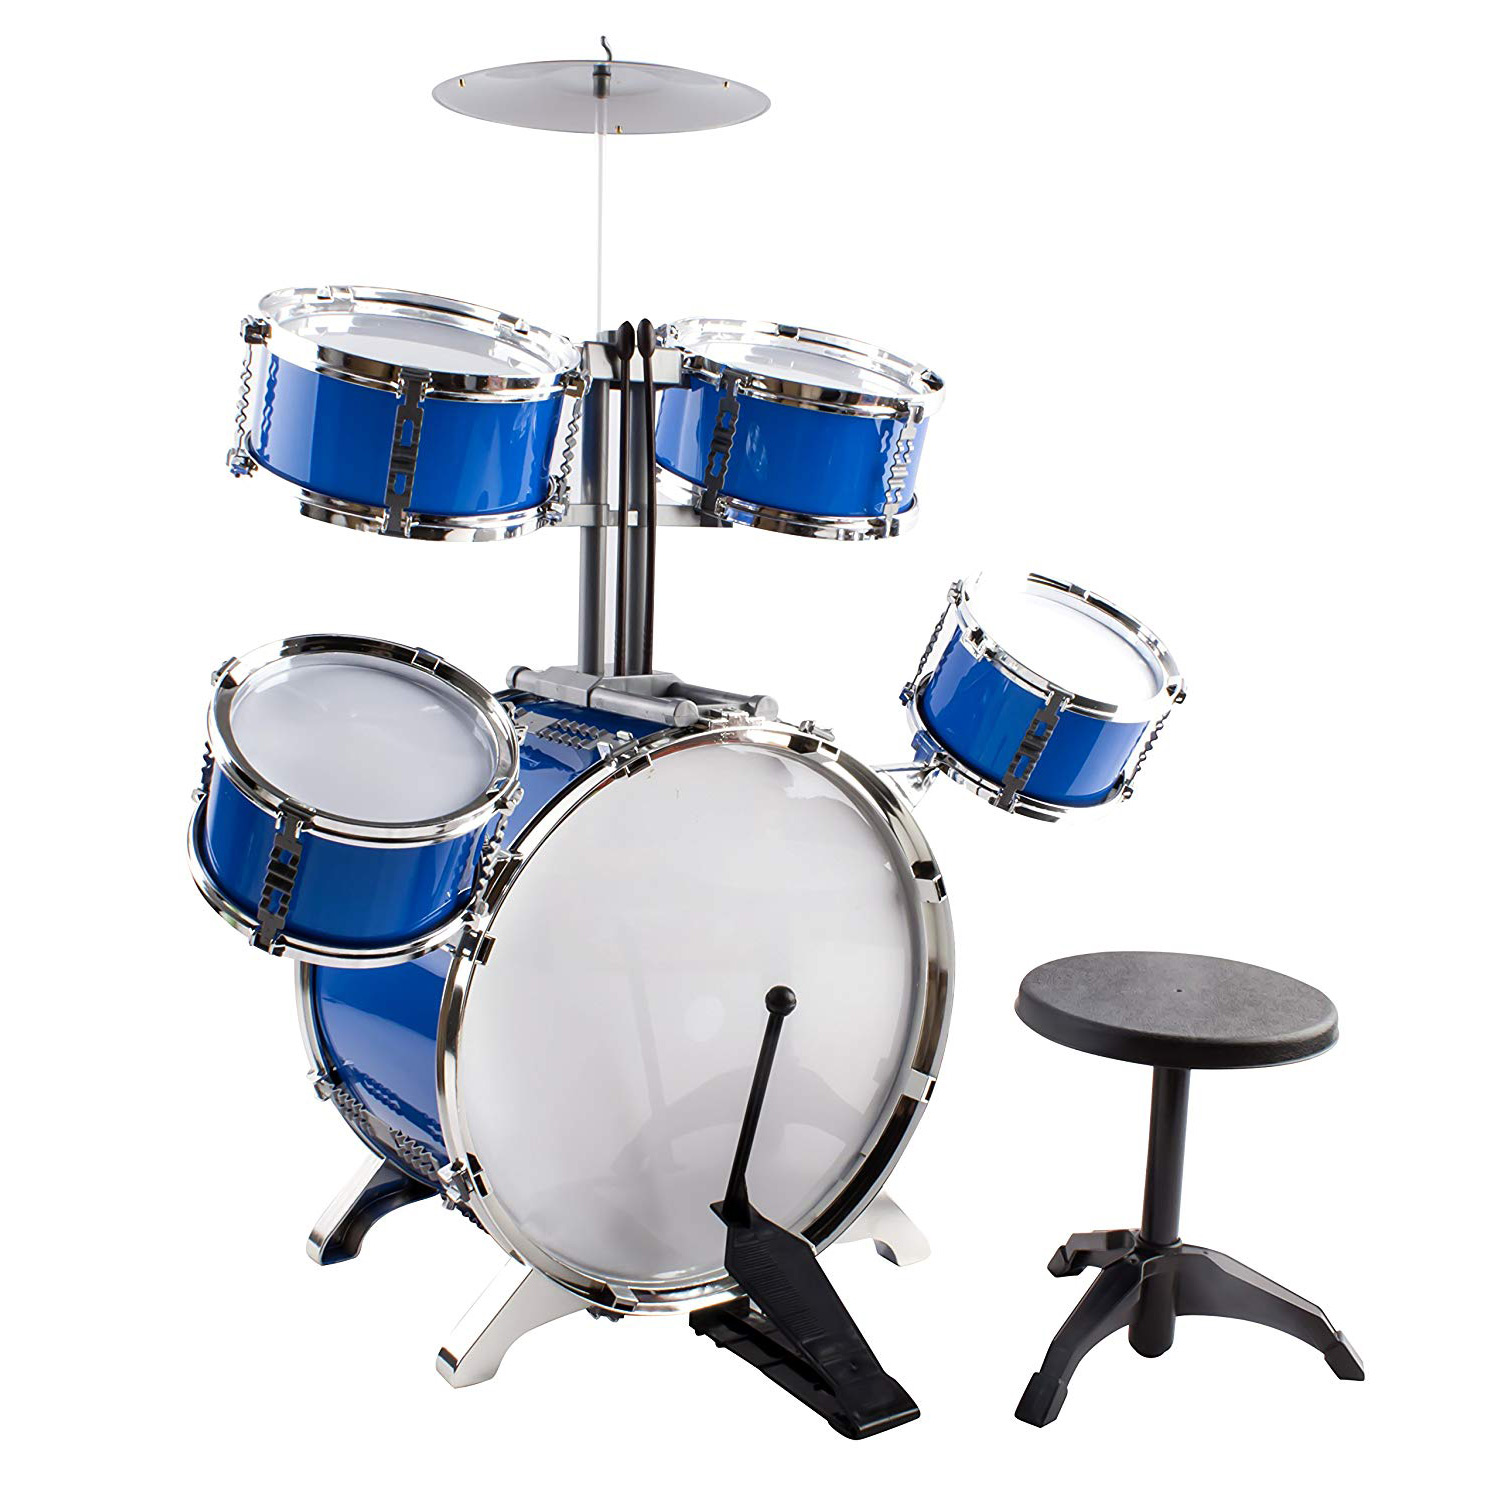 Classic Rhythm Toy Jazz Drum Big XXXL Size Children Kid\'s Musical Instrument Playset With 5 Drums, Cymbal, Chair, Kick Pedal, And Drumsticks A Perfect Beginner Set For Kids (Blue)